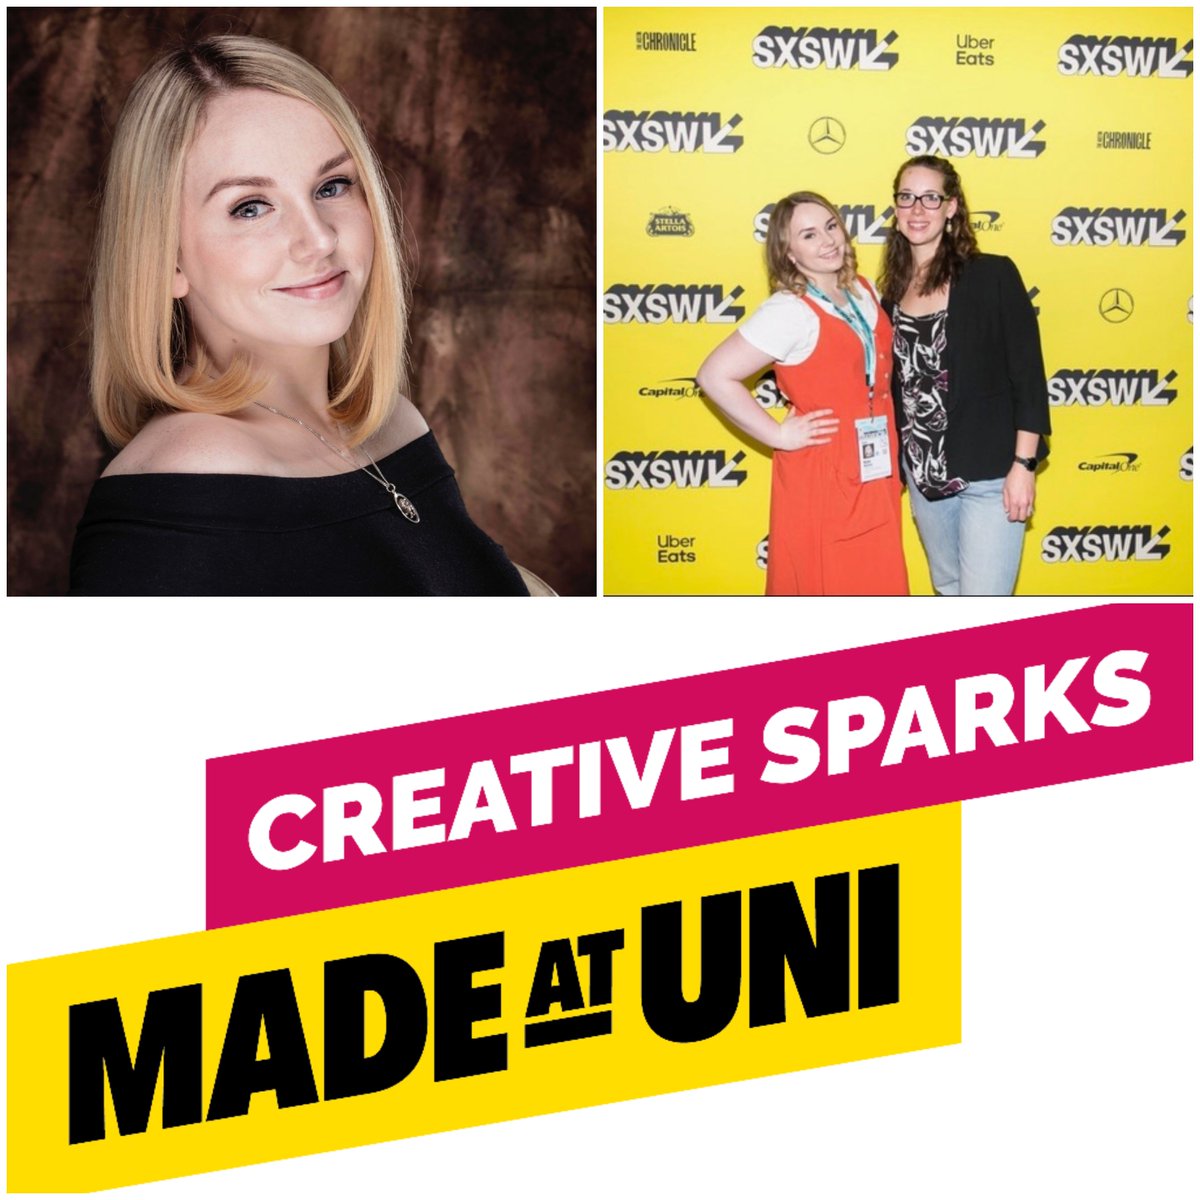 Kate McCoid is now an Assistant VFX Editor for Walt Disney.
Graduating in 2013 from the BA(hons) Film degree.  she has worked for Netflix, Channel 4, Sky plus many more
'I used to dream of working on a Wes Anderson Film, now I have thanks to University of Suffolk'
#madeatuni